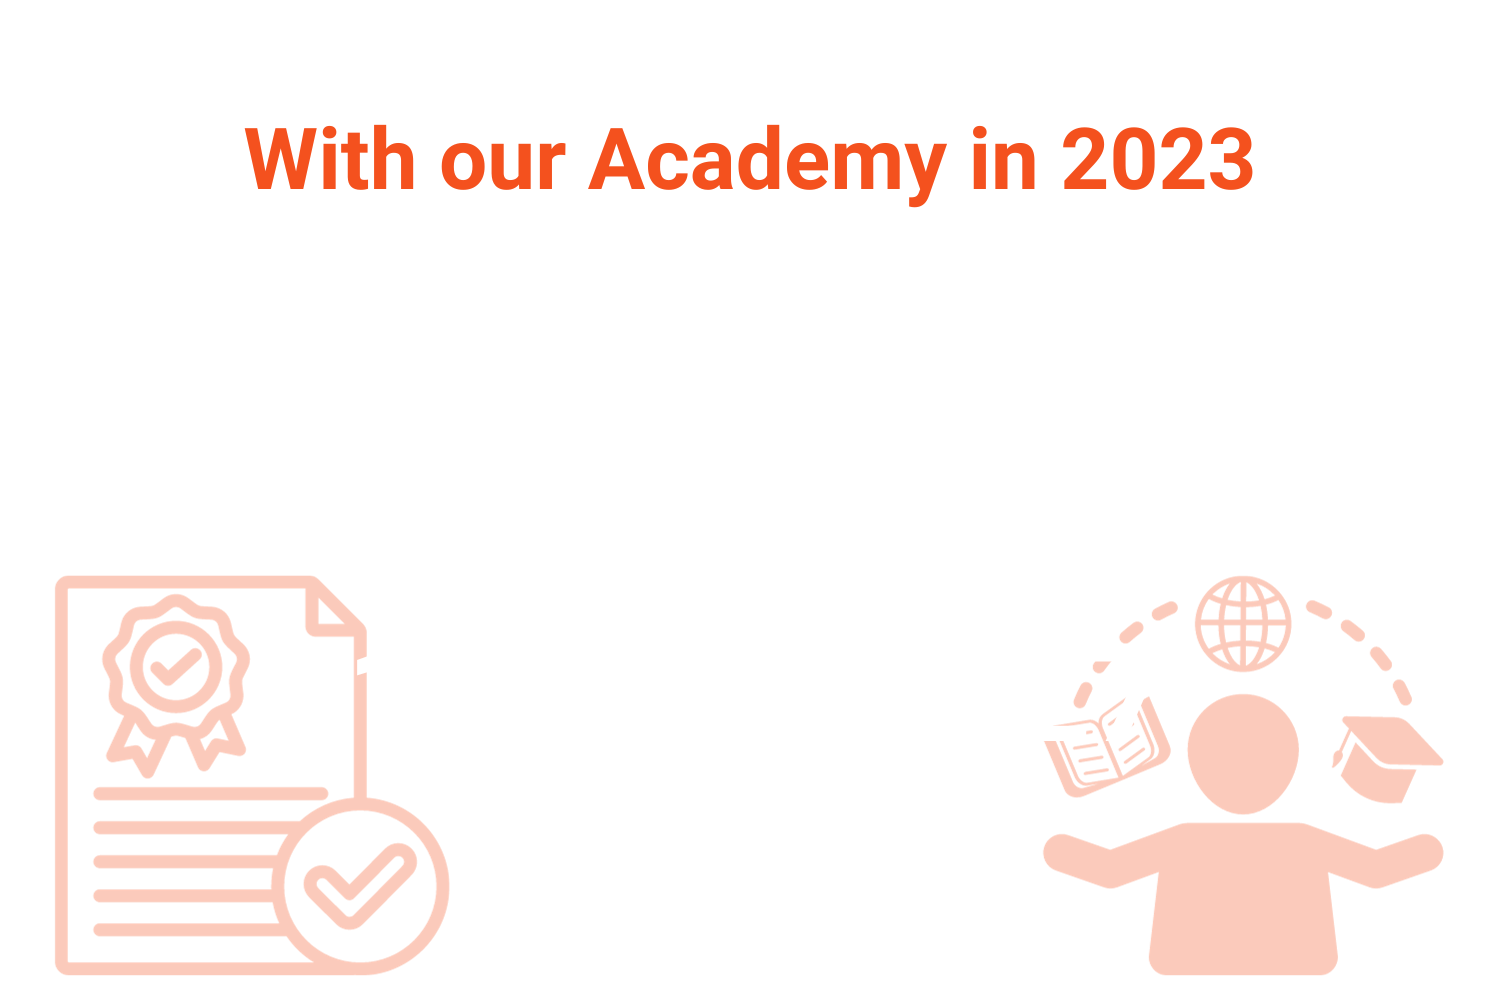 With our Academy in 2023 Accreditations completed: 218 People taking part in courses: 827